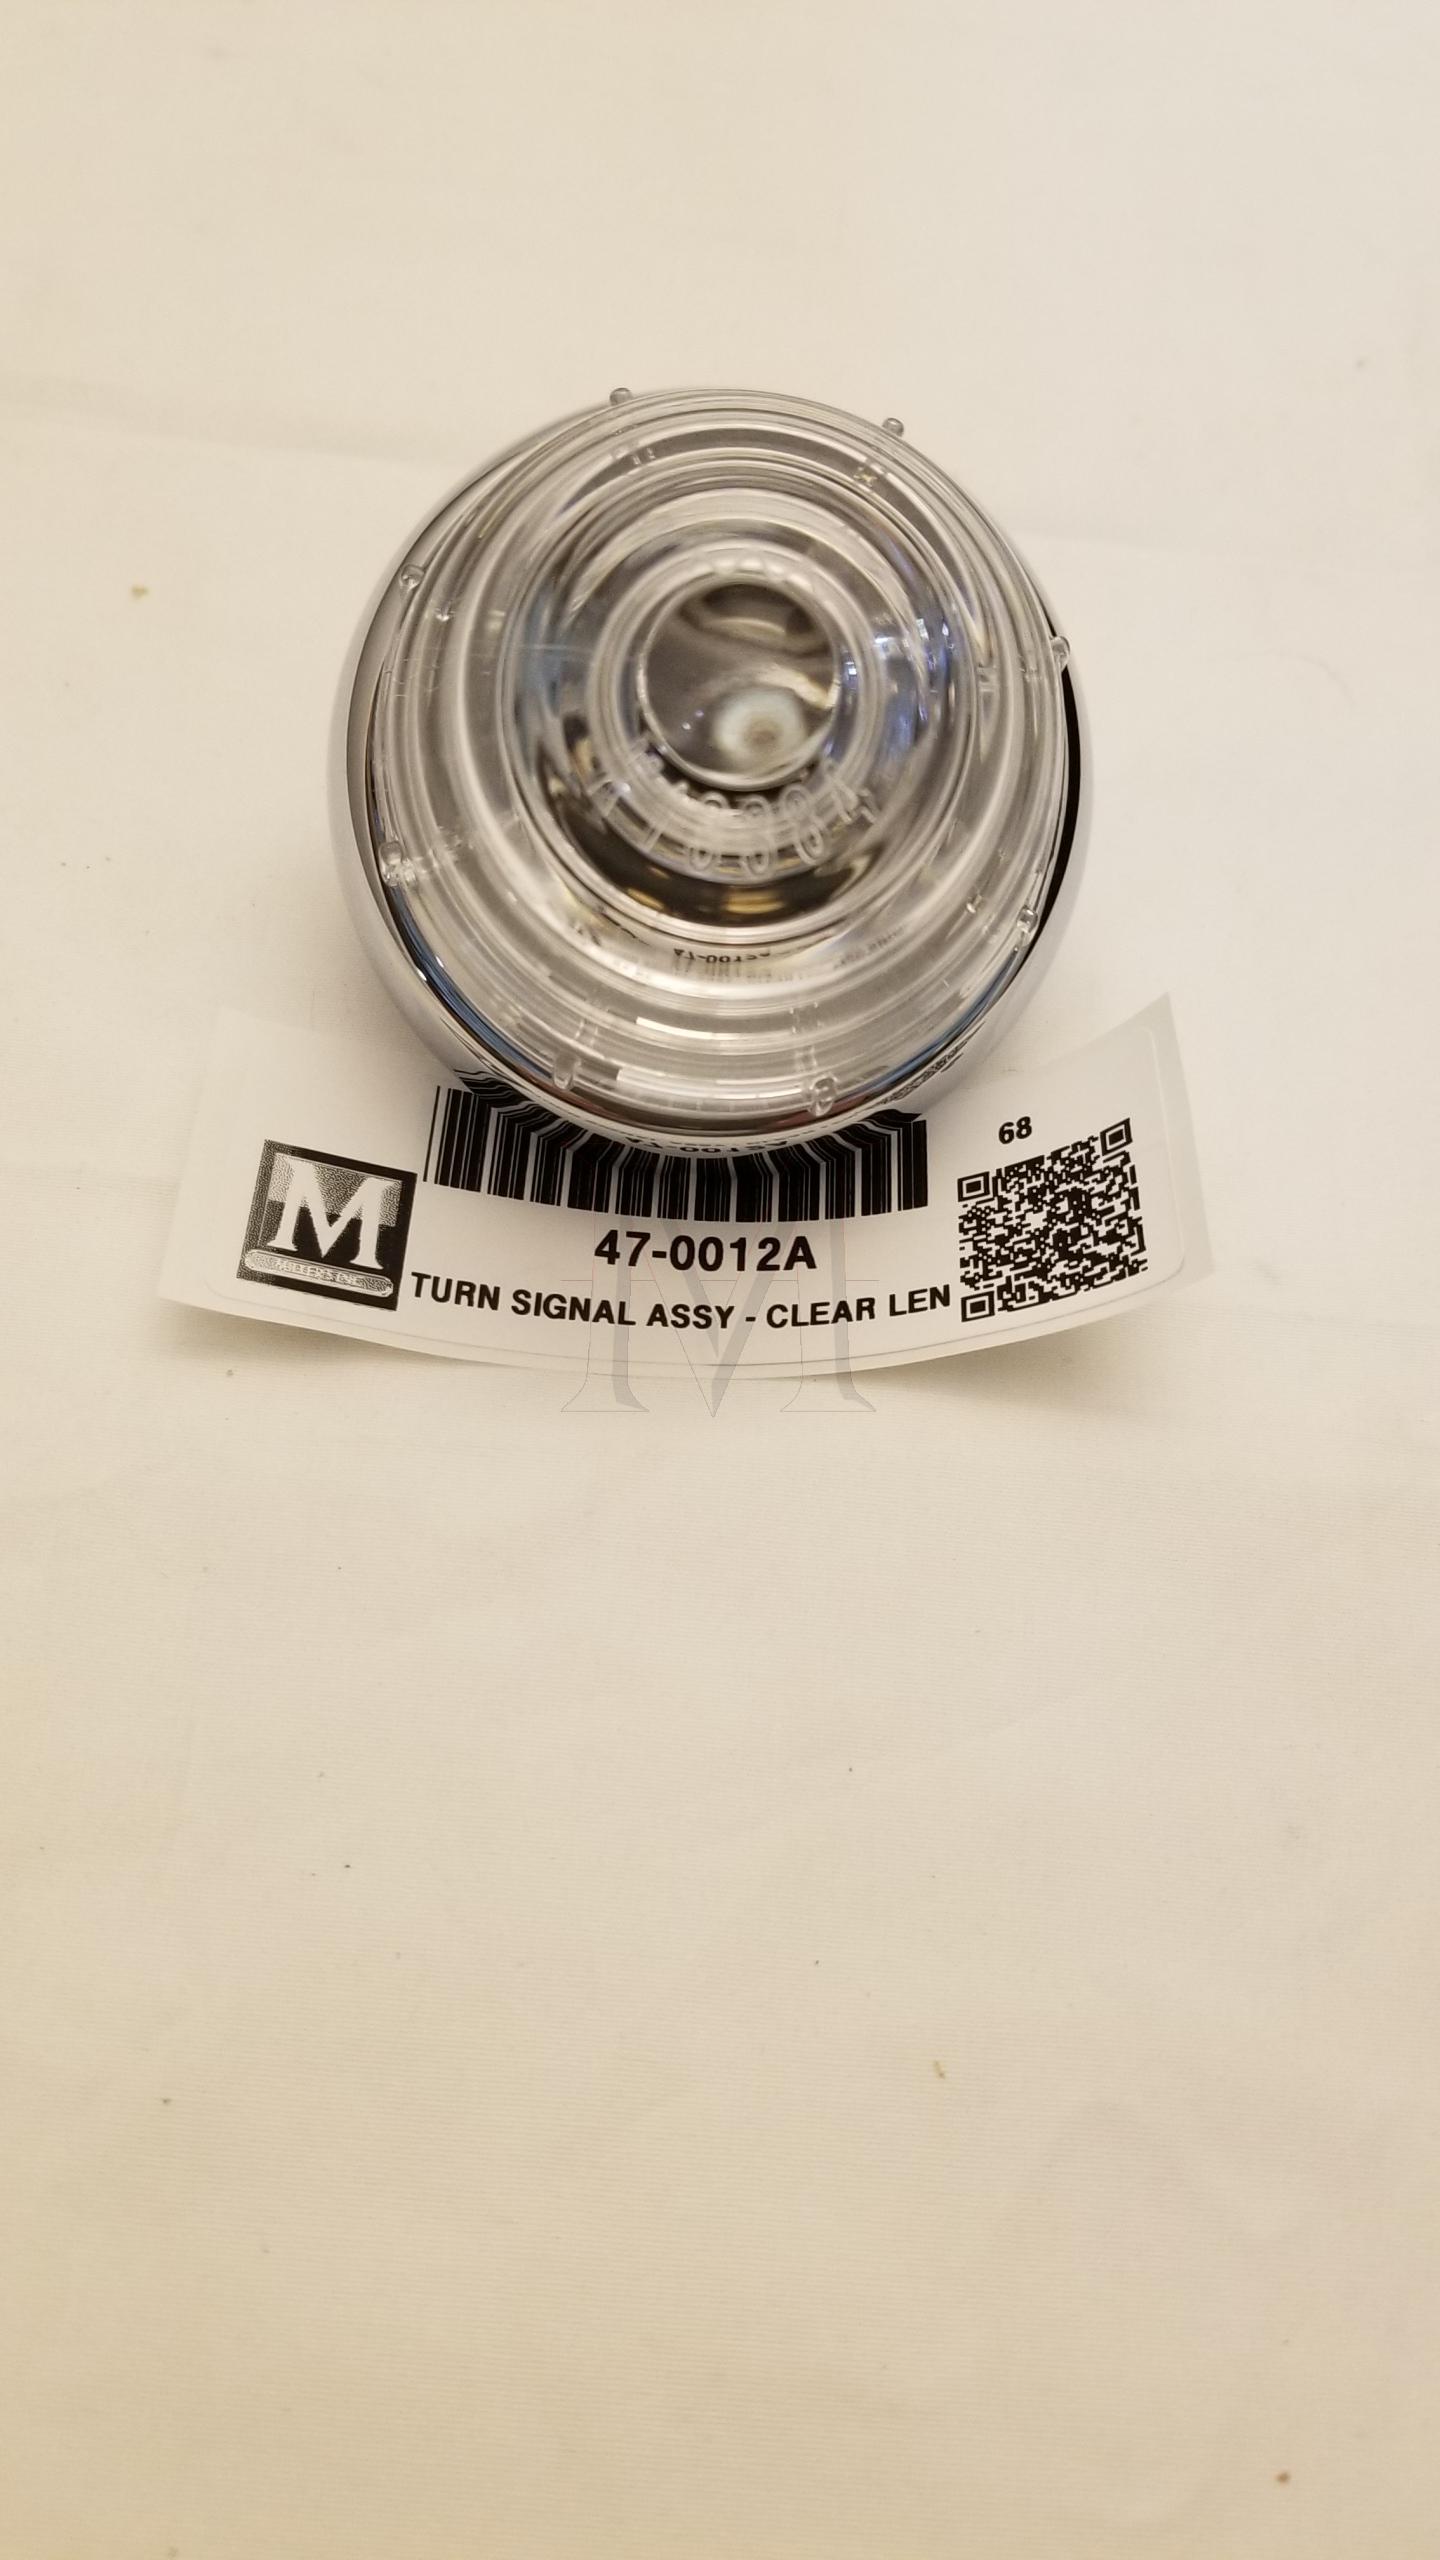 TURN SIGNAL ASSEMBLY - CLEAR LENS